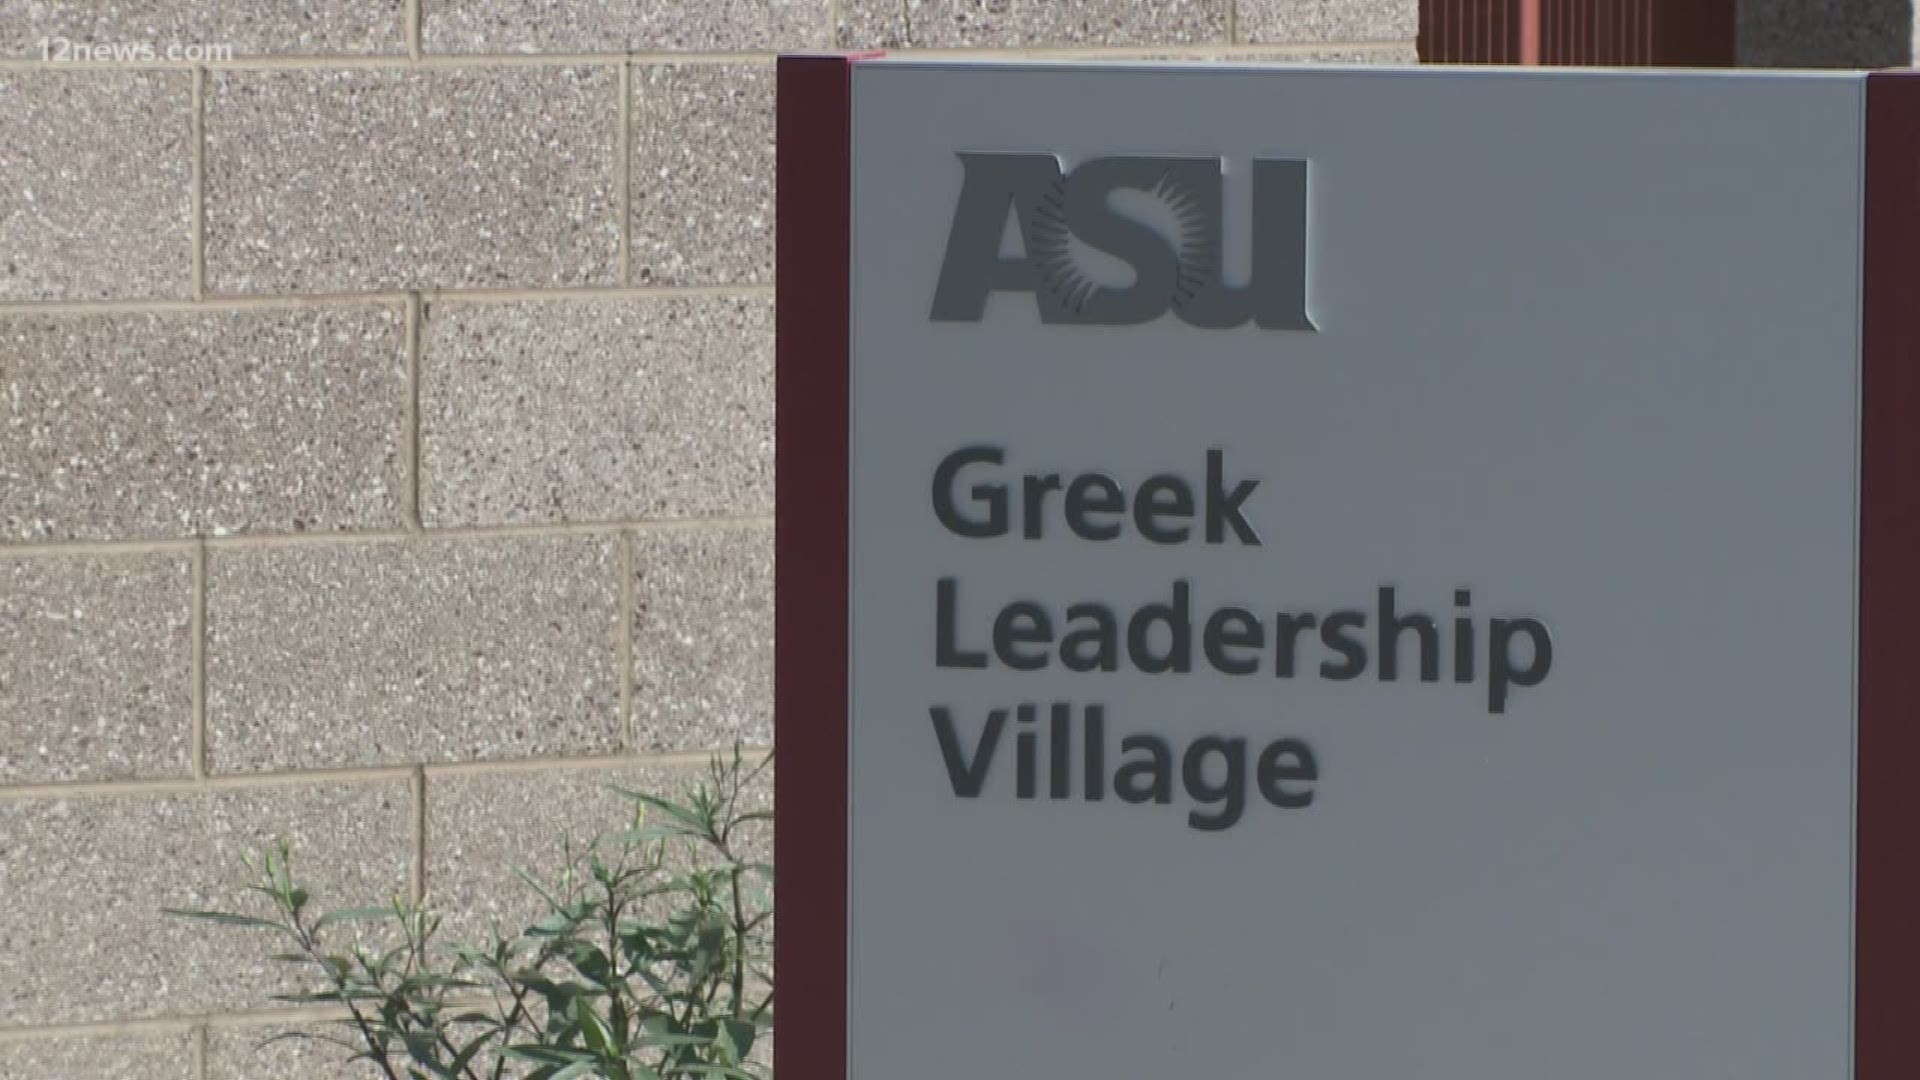 27 sororities and fraternities make up a new Greek Village on the ASU campus. The village is considered to be on-campus housing and will have RA's that will monitor the students actions.